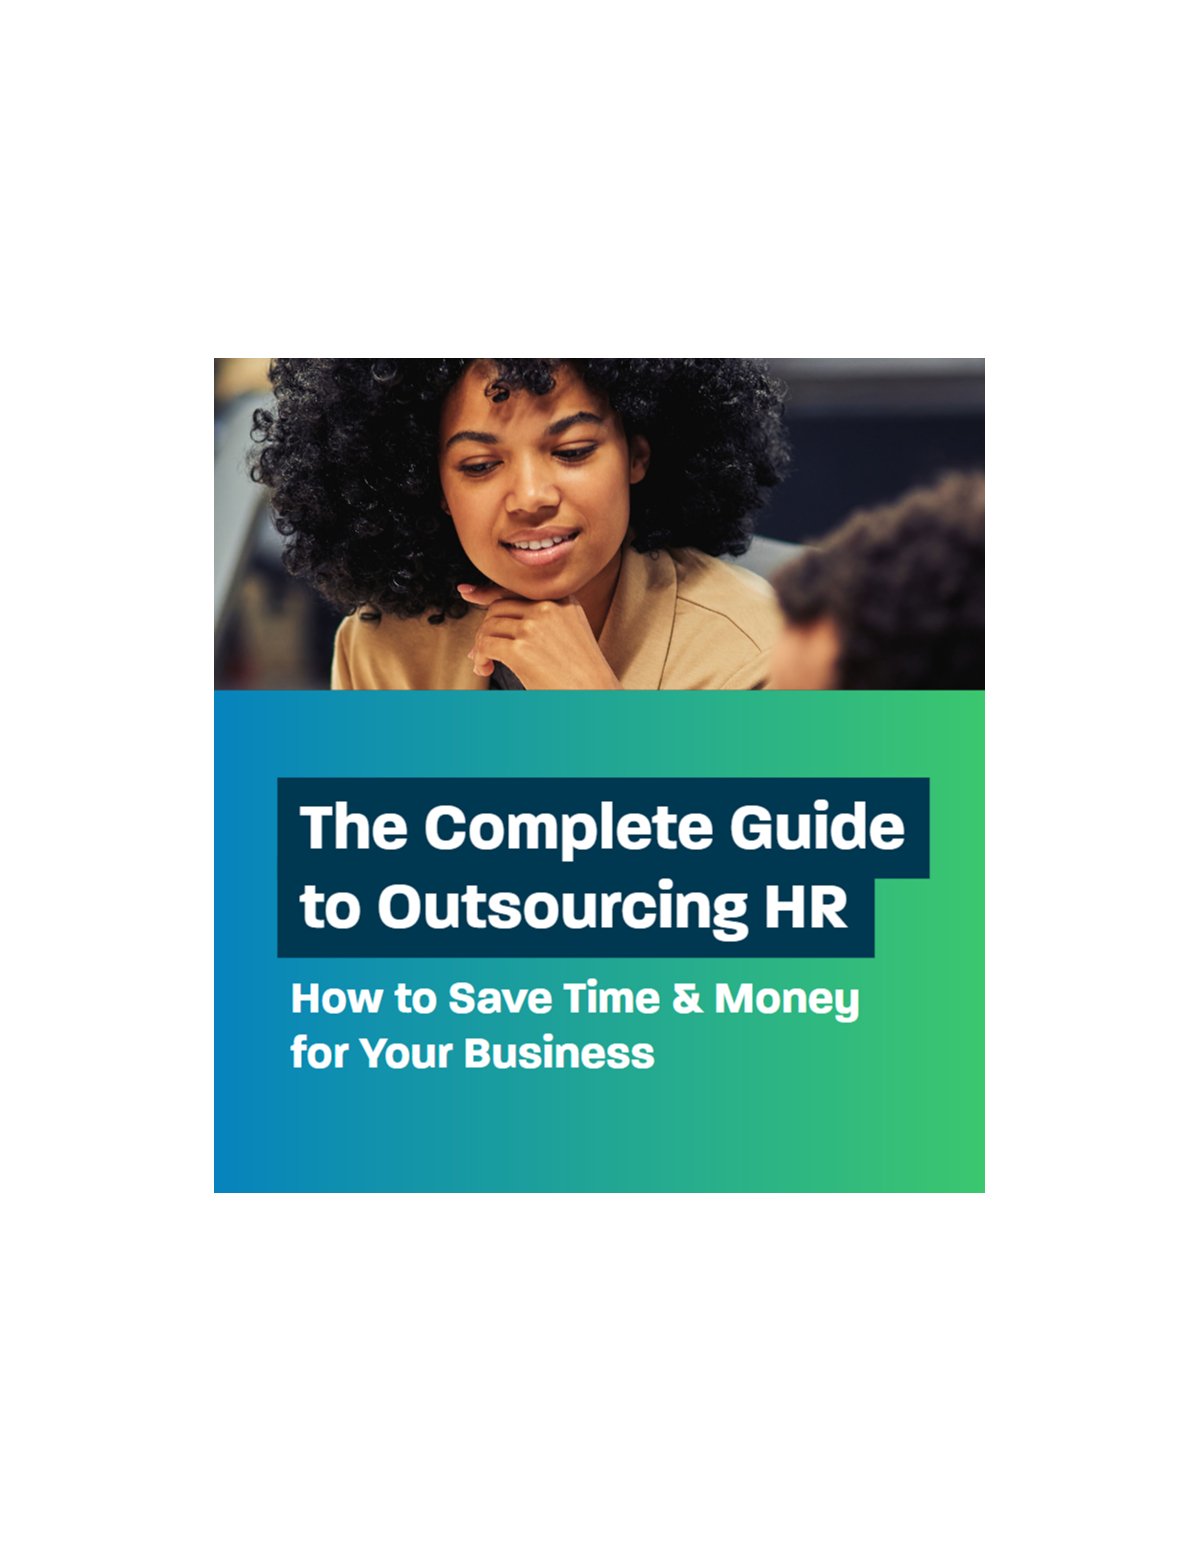 The Complete Guide to Outsourcing HR